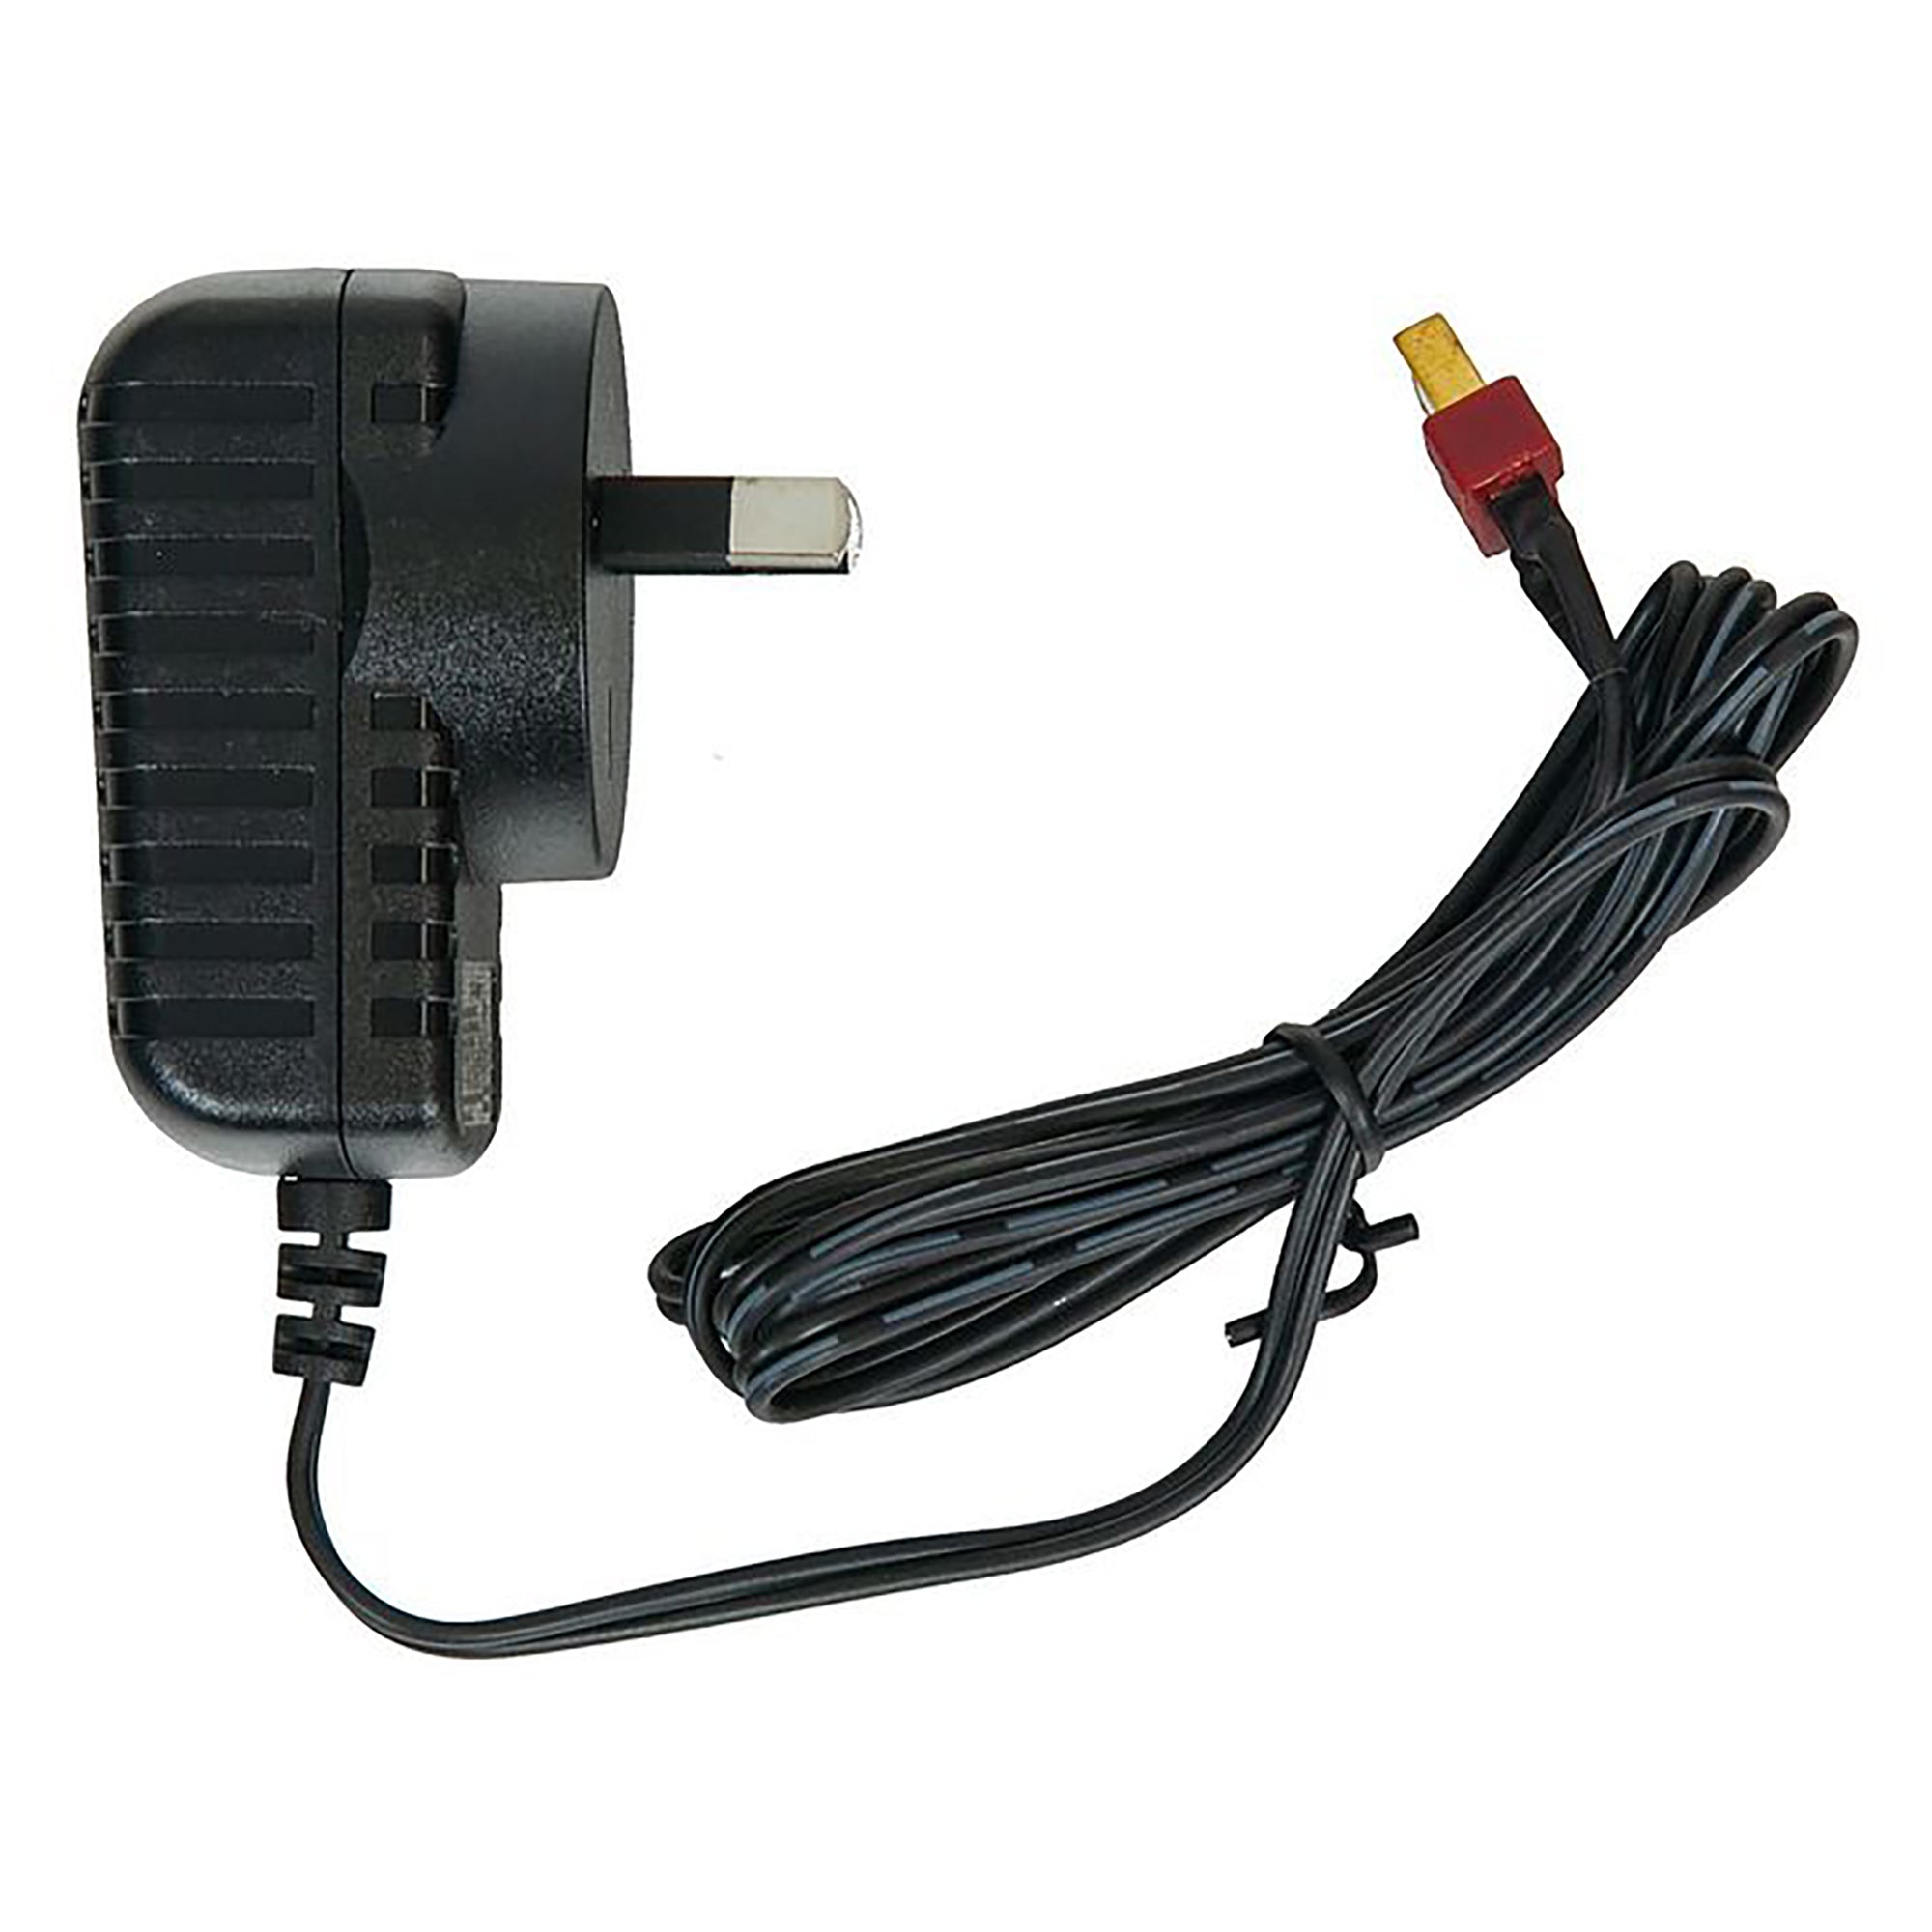 HSP Racing Charger for HSP 1/10 PRO/ACE Models